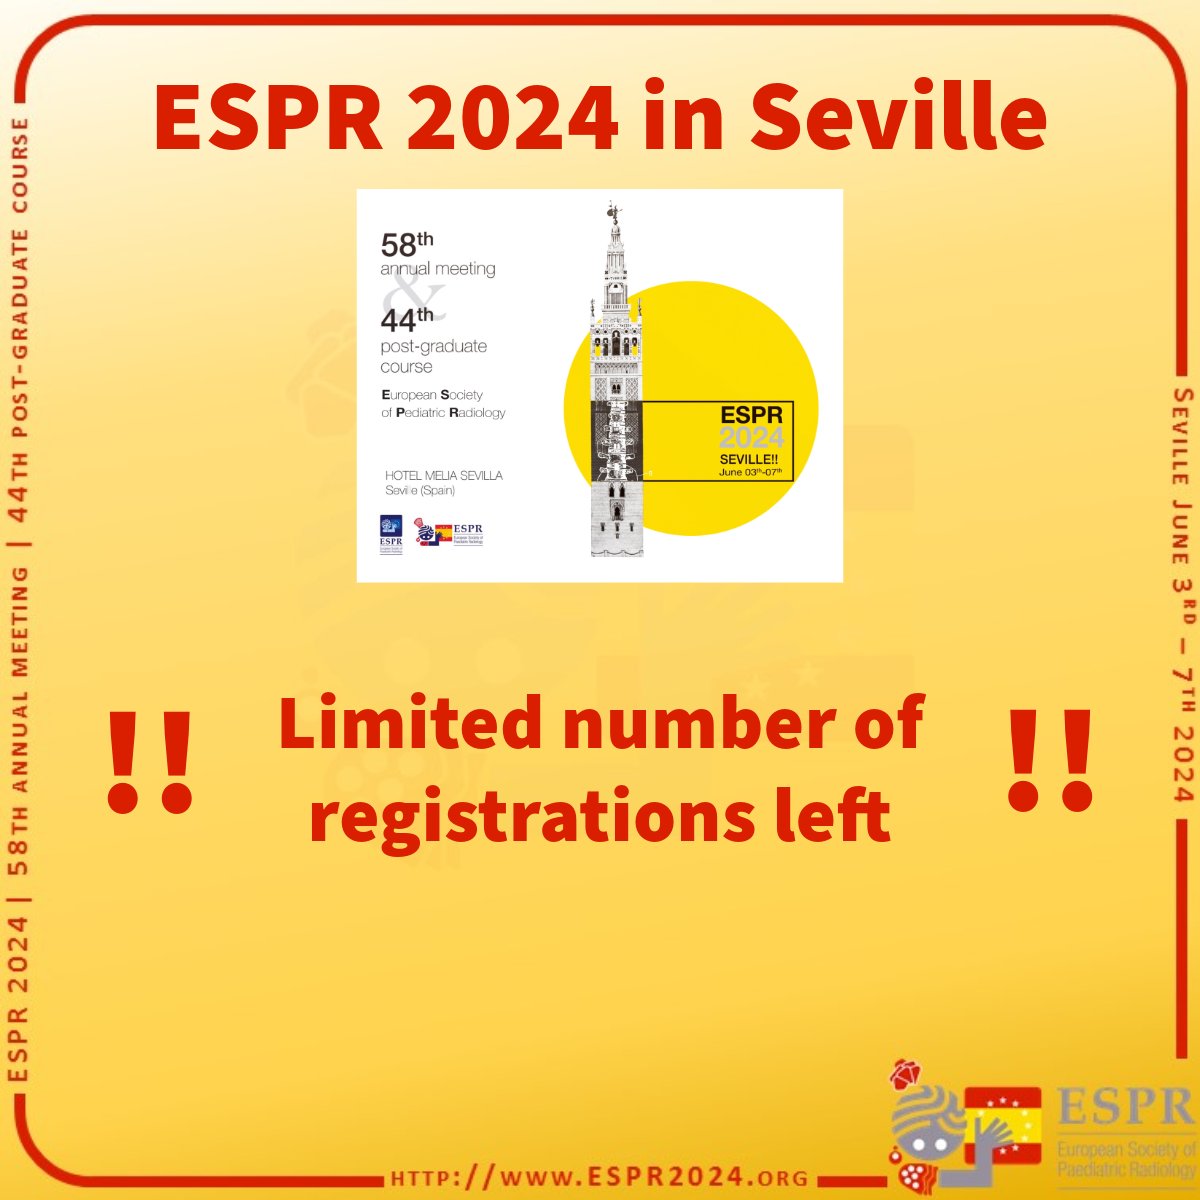 You are amazing! We have so many registrations for our upcoming congress #ESPR2024, that there are only a limited number of available spots left! If you have not registered yet, make sure to get your seat at espr2024.org/index.php/insc…